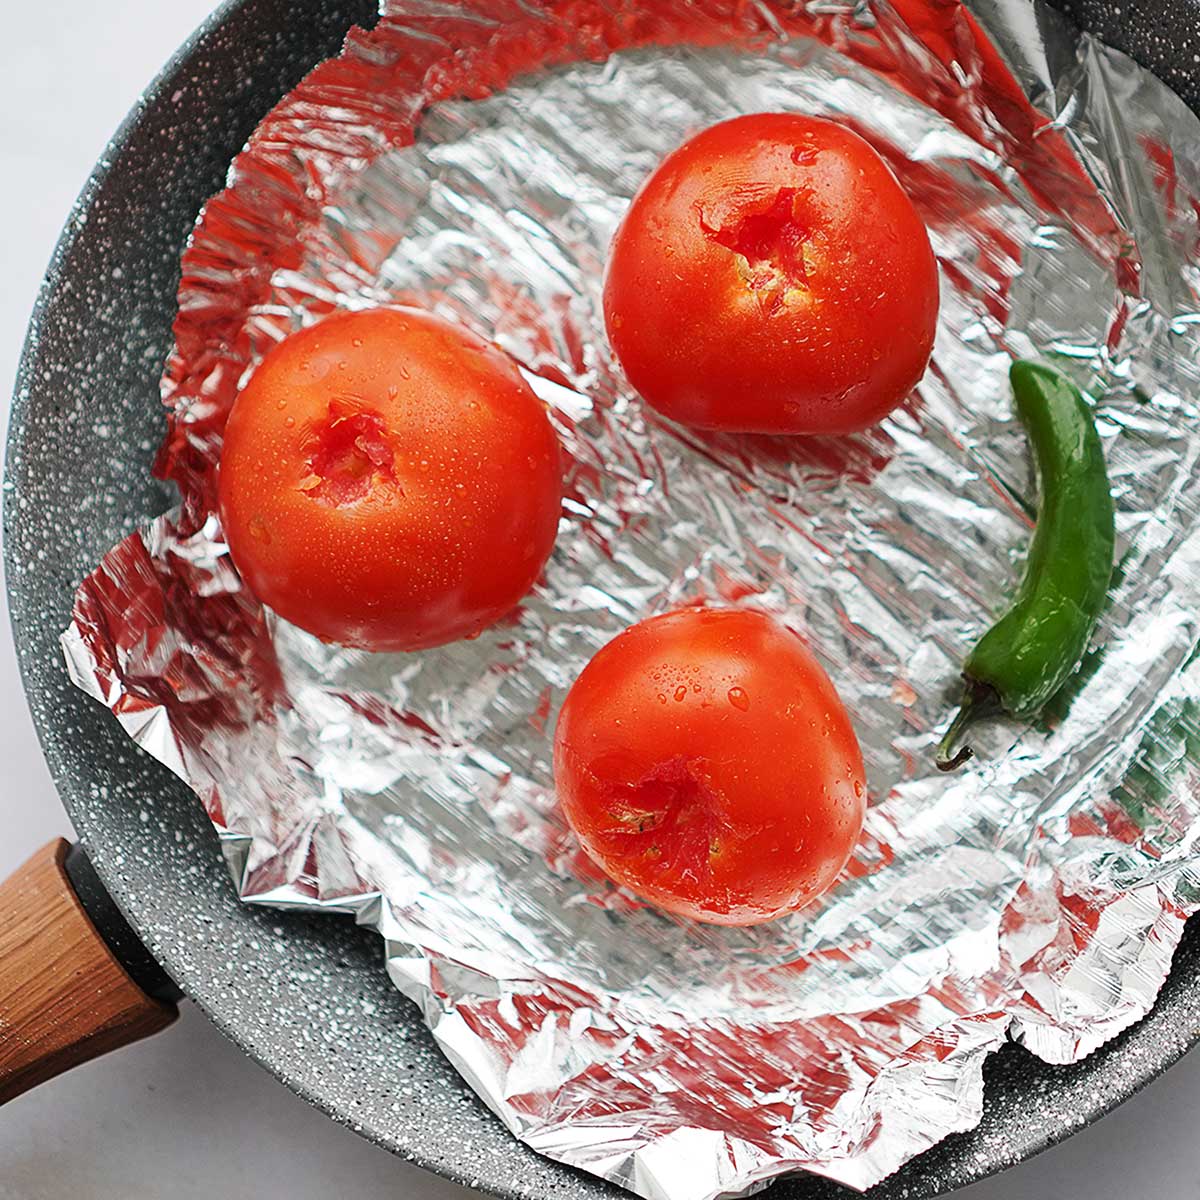 A skillet with tomatoes lined with aluminum foil.